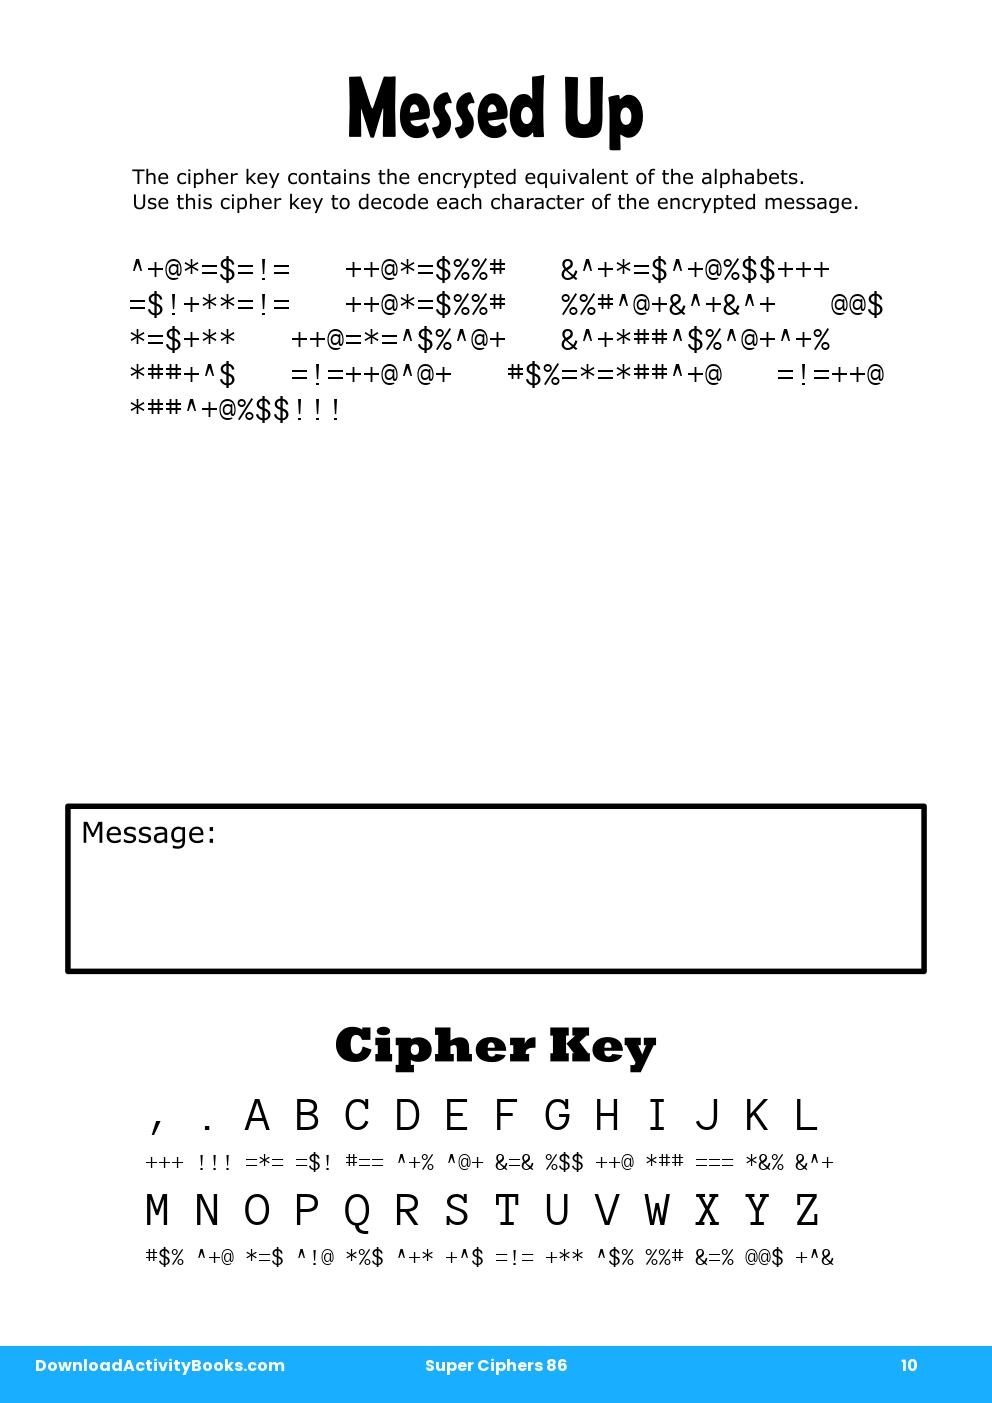 Messed Up in Super Ciphers 86